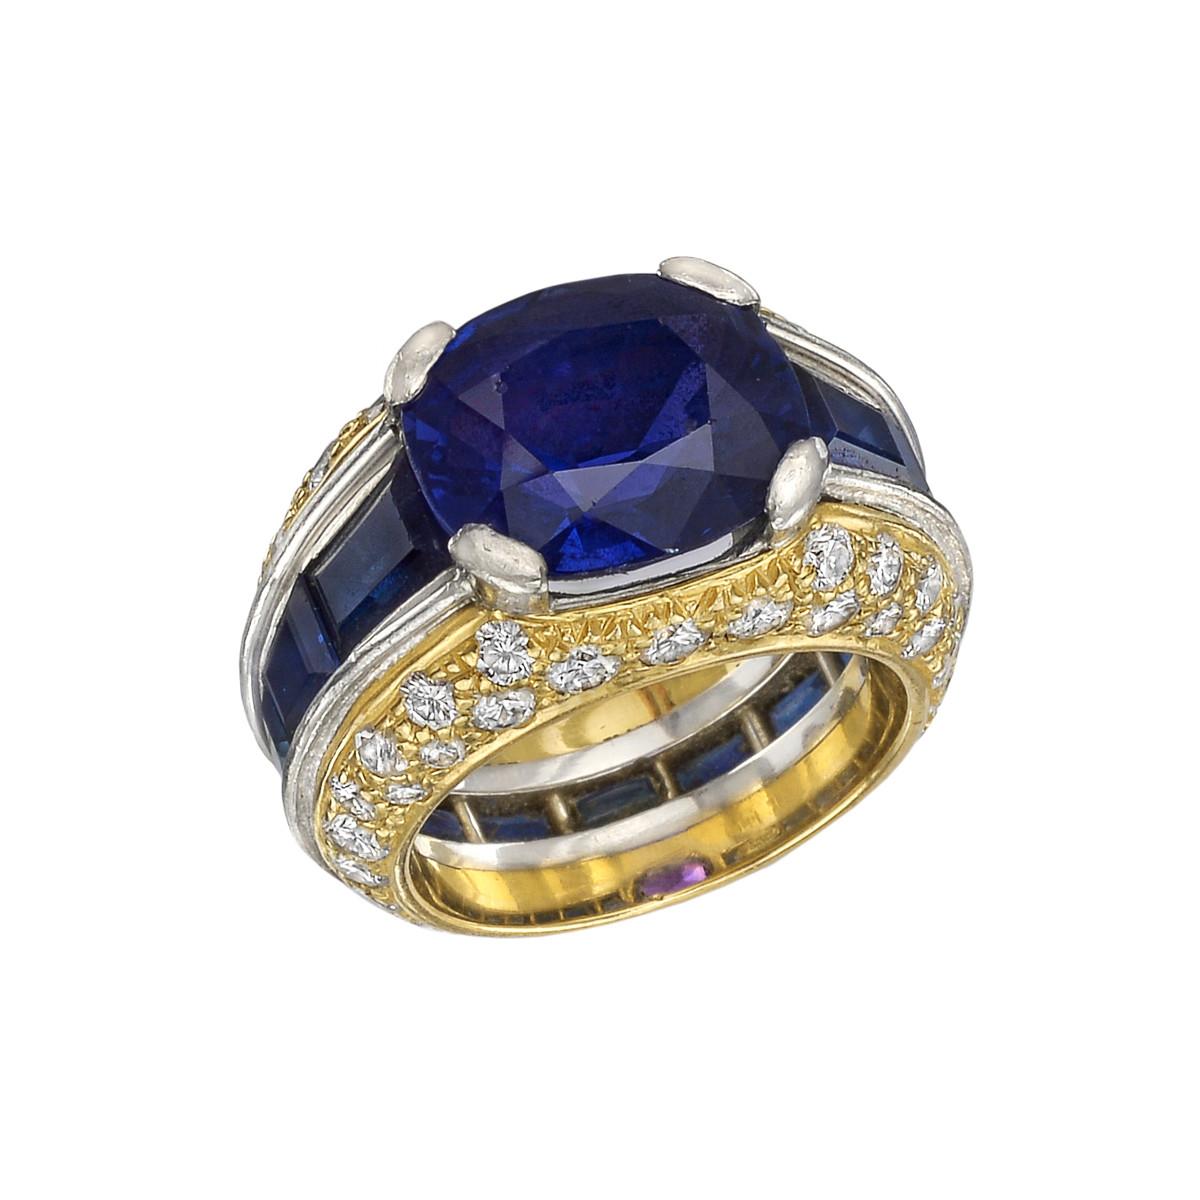 Cushion Cut 5.15 Carat Sapphire and Diamond Cocktail Ring For Sale